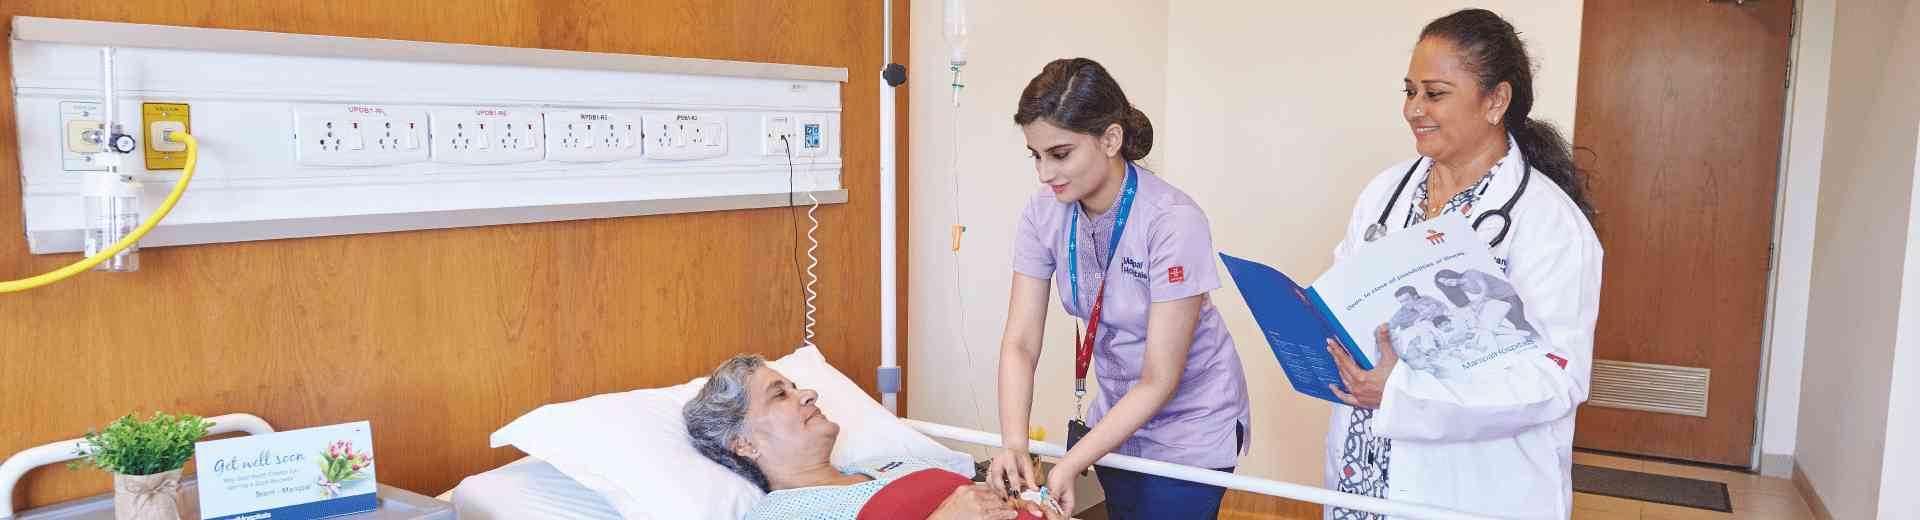 Outpatient Inpatient and Emergency services in Varthur Road, Bangalore